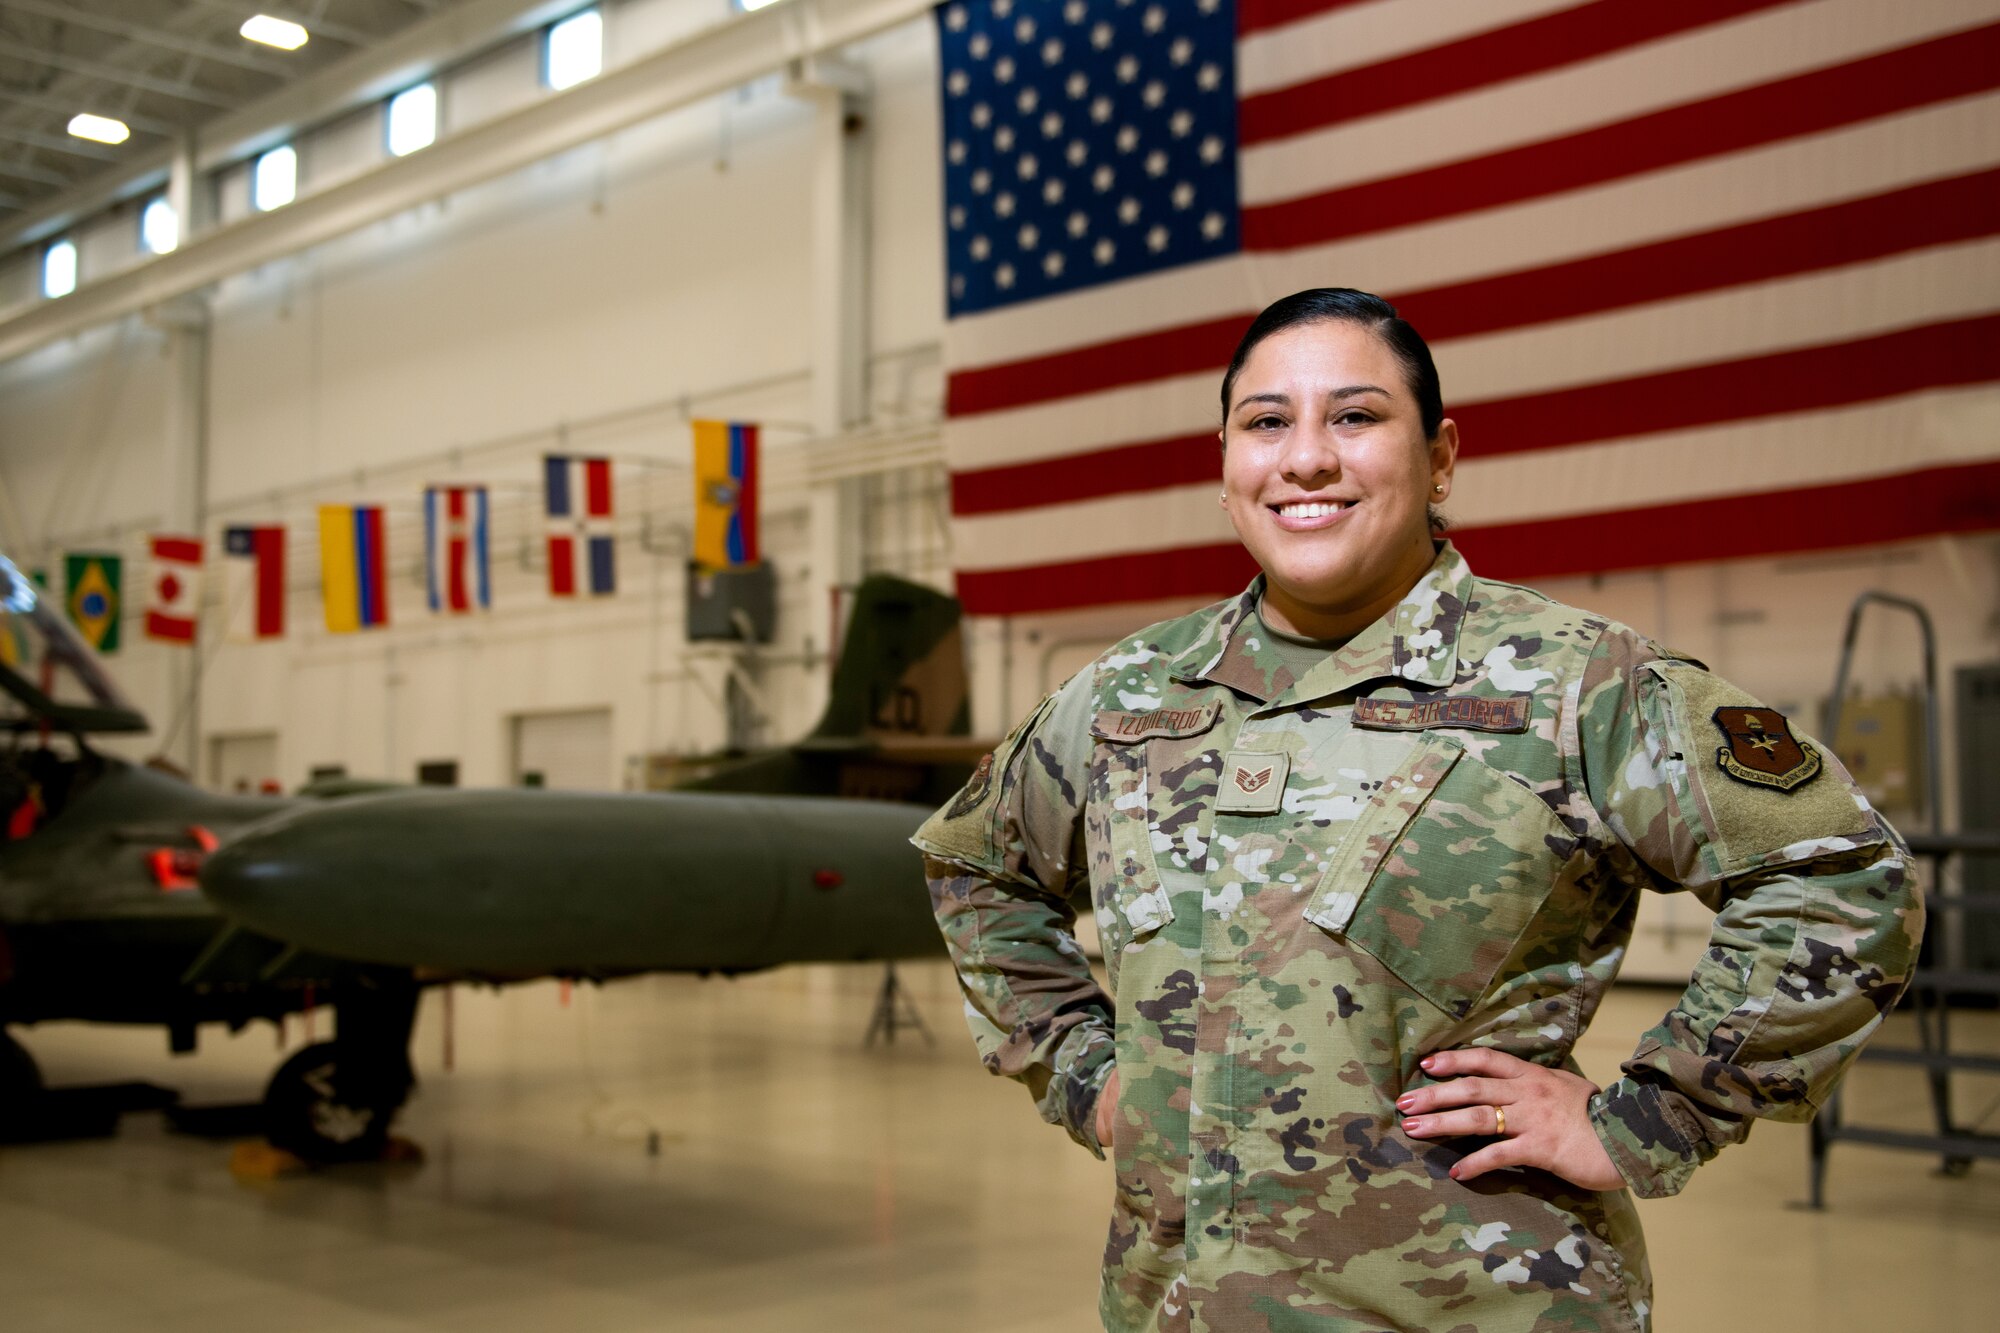 U.S. Air Force Staff Sgt. Soleine Izquierdo, Inter-American Air Forces Academy international student manager, has been in the military for seven years and eight months. She has overcome much, and knows many people do not understand the significance of that.